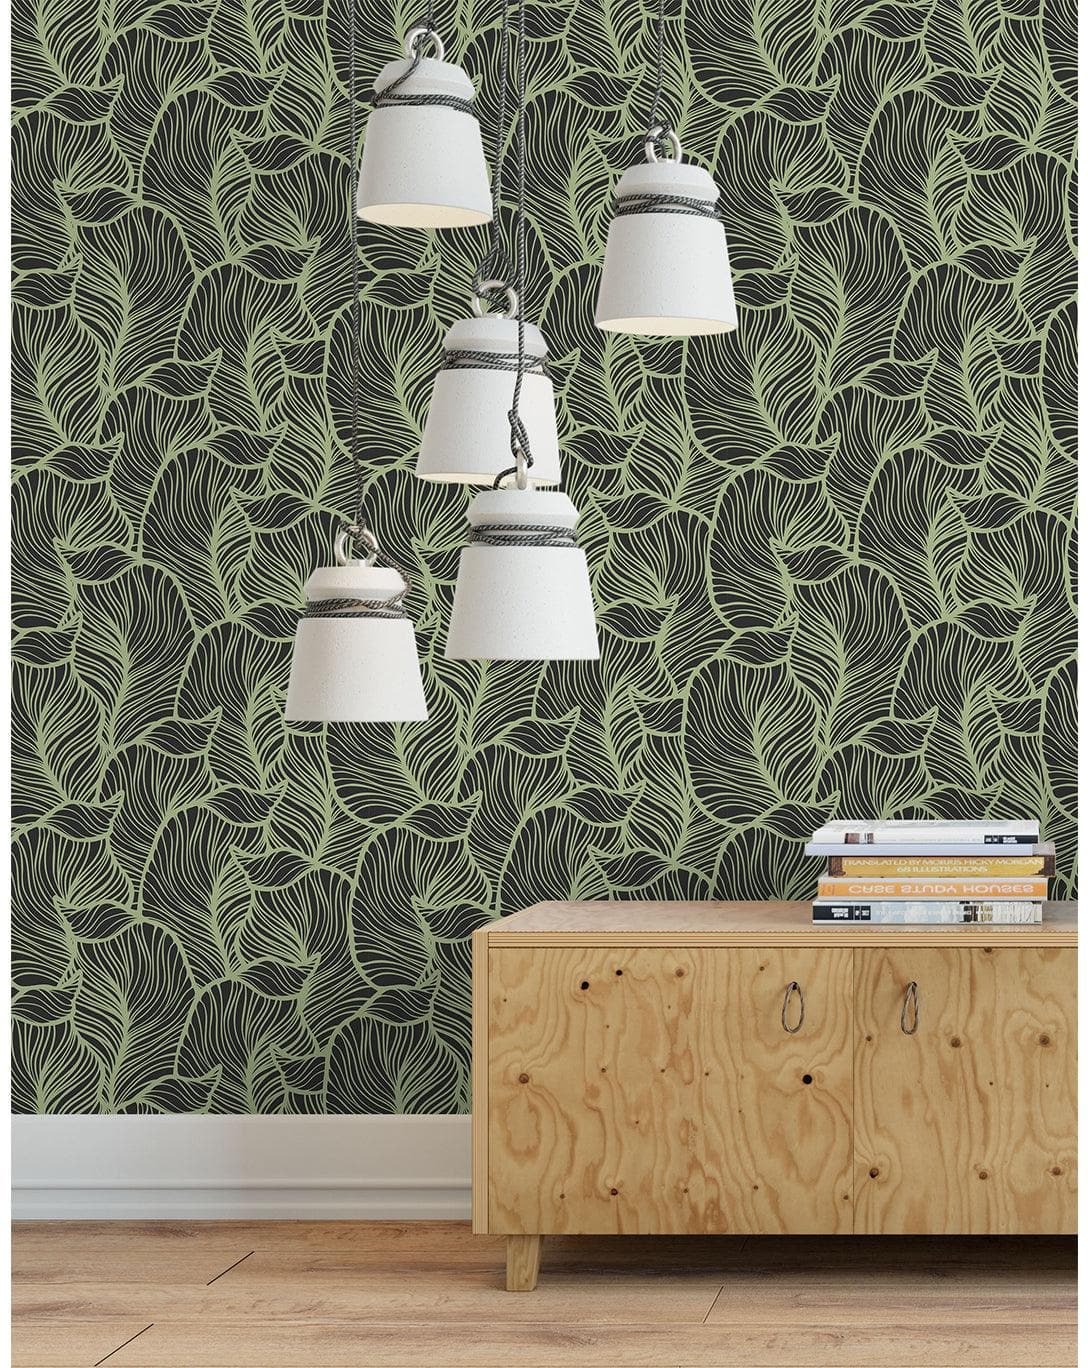 Green Tropical Leaves Removable Wallpaper Green Tropical Leaves Removable Wallpaper Green Tropical Leaves Removable Wallpaper 